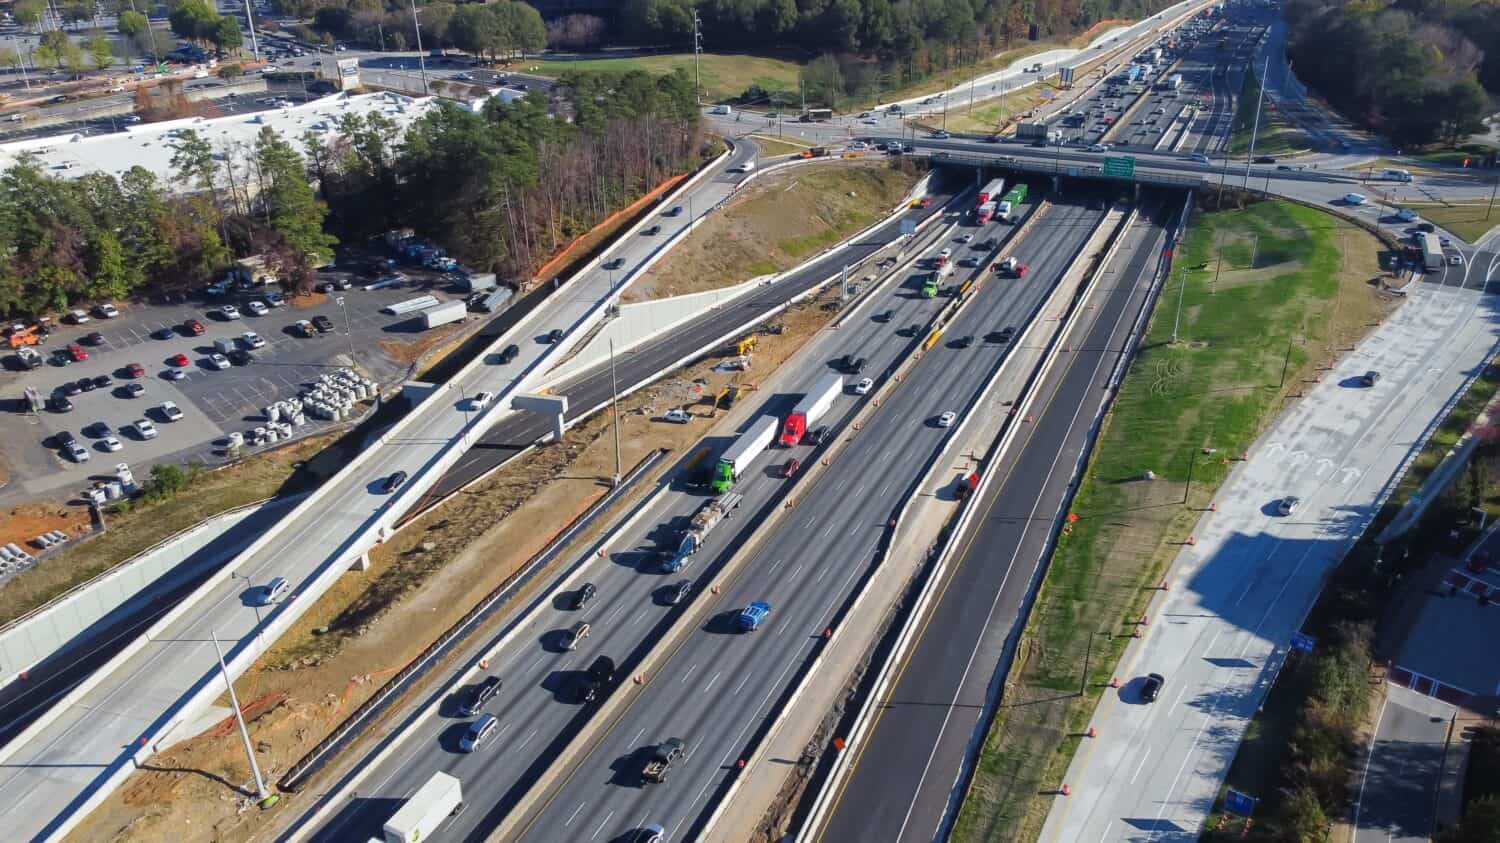 Busy traffic along Highway I-285 (the Perimeter) with under construction service road, bypass near Ashford Dunwoody in midtown Atlanta, Georgia, USA. Aerial view modern multiple lanes infrastructure